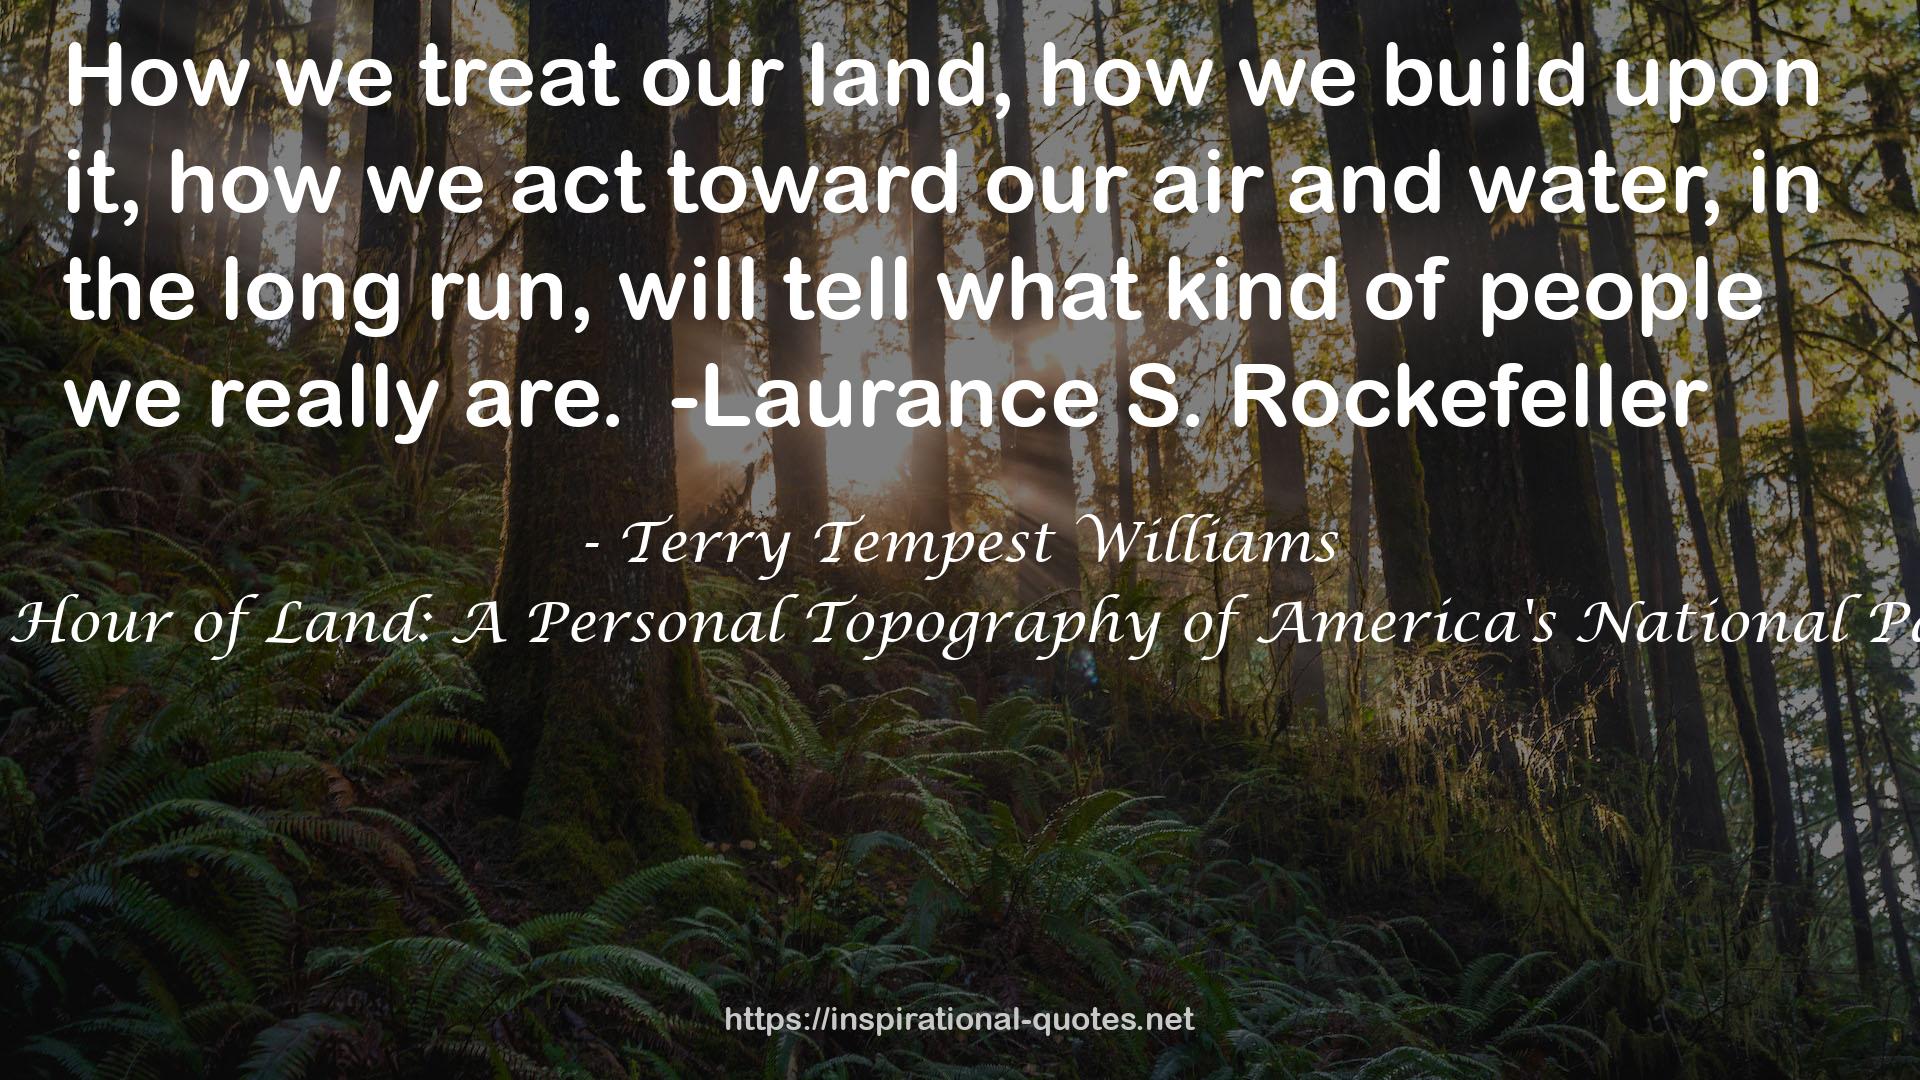 The Hour of Land: A Personal Topography of America's National Parks QUOTES